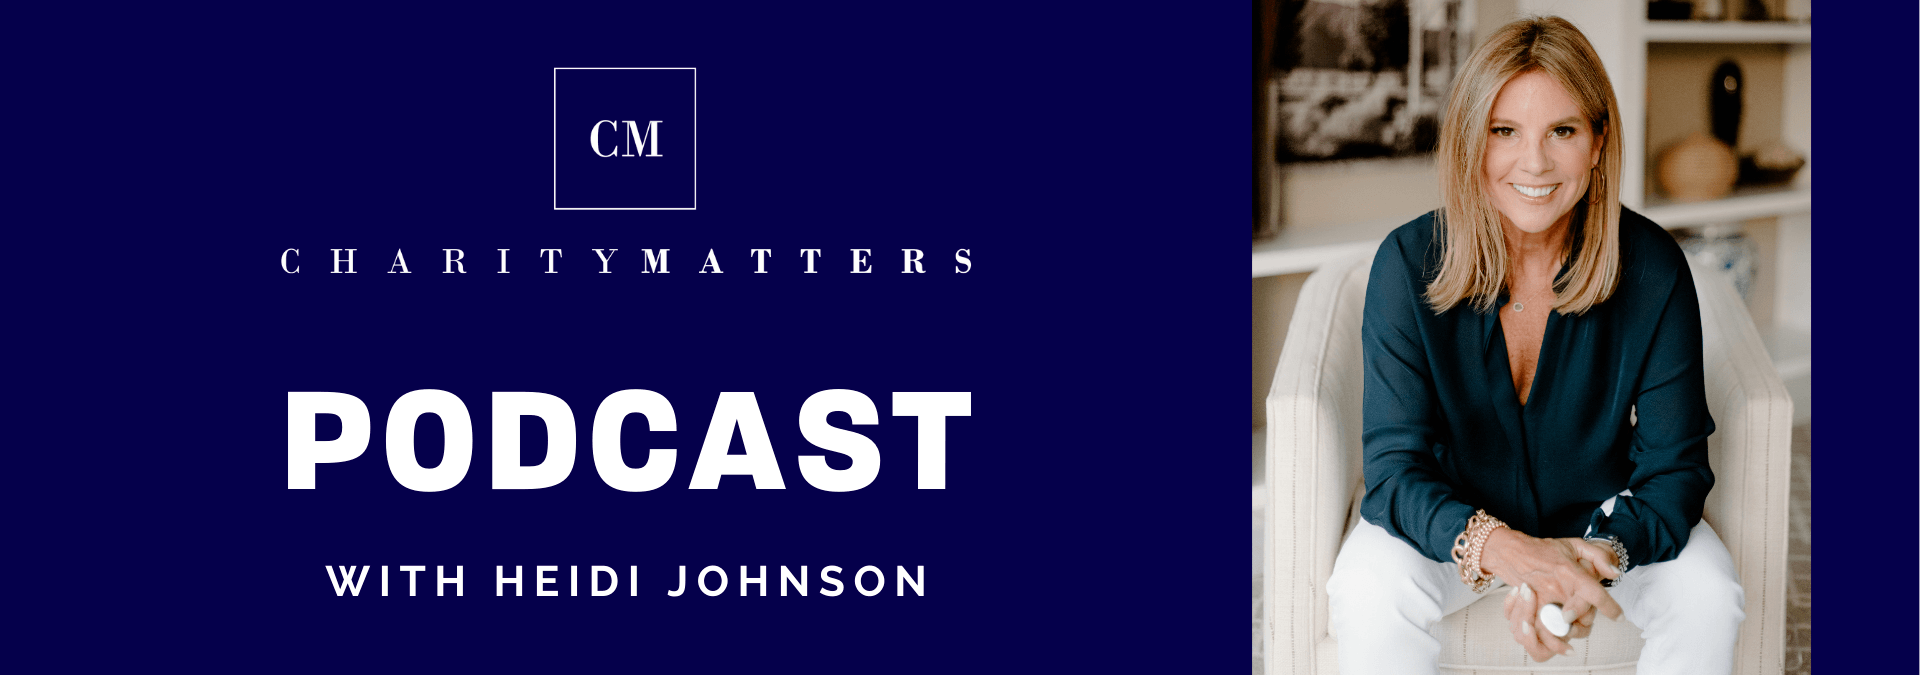 Charity Matters Podcast with Heidi Johnson